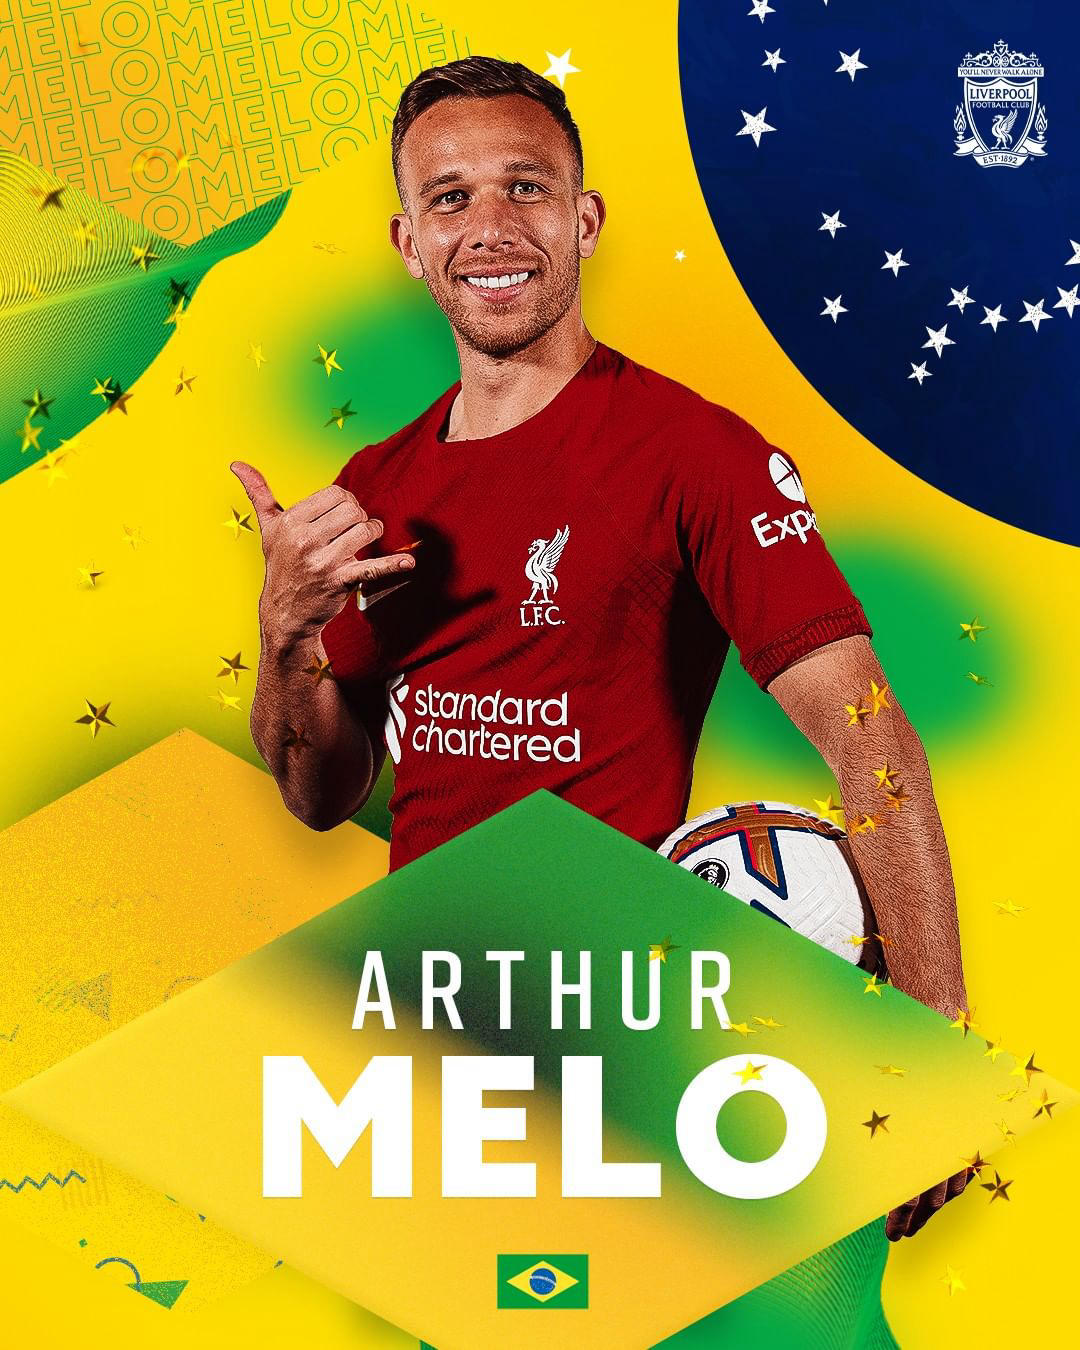 Liverpool Football Club - We’re delighted to confirm the signing of #arthurhmelo on loan from Juvent